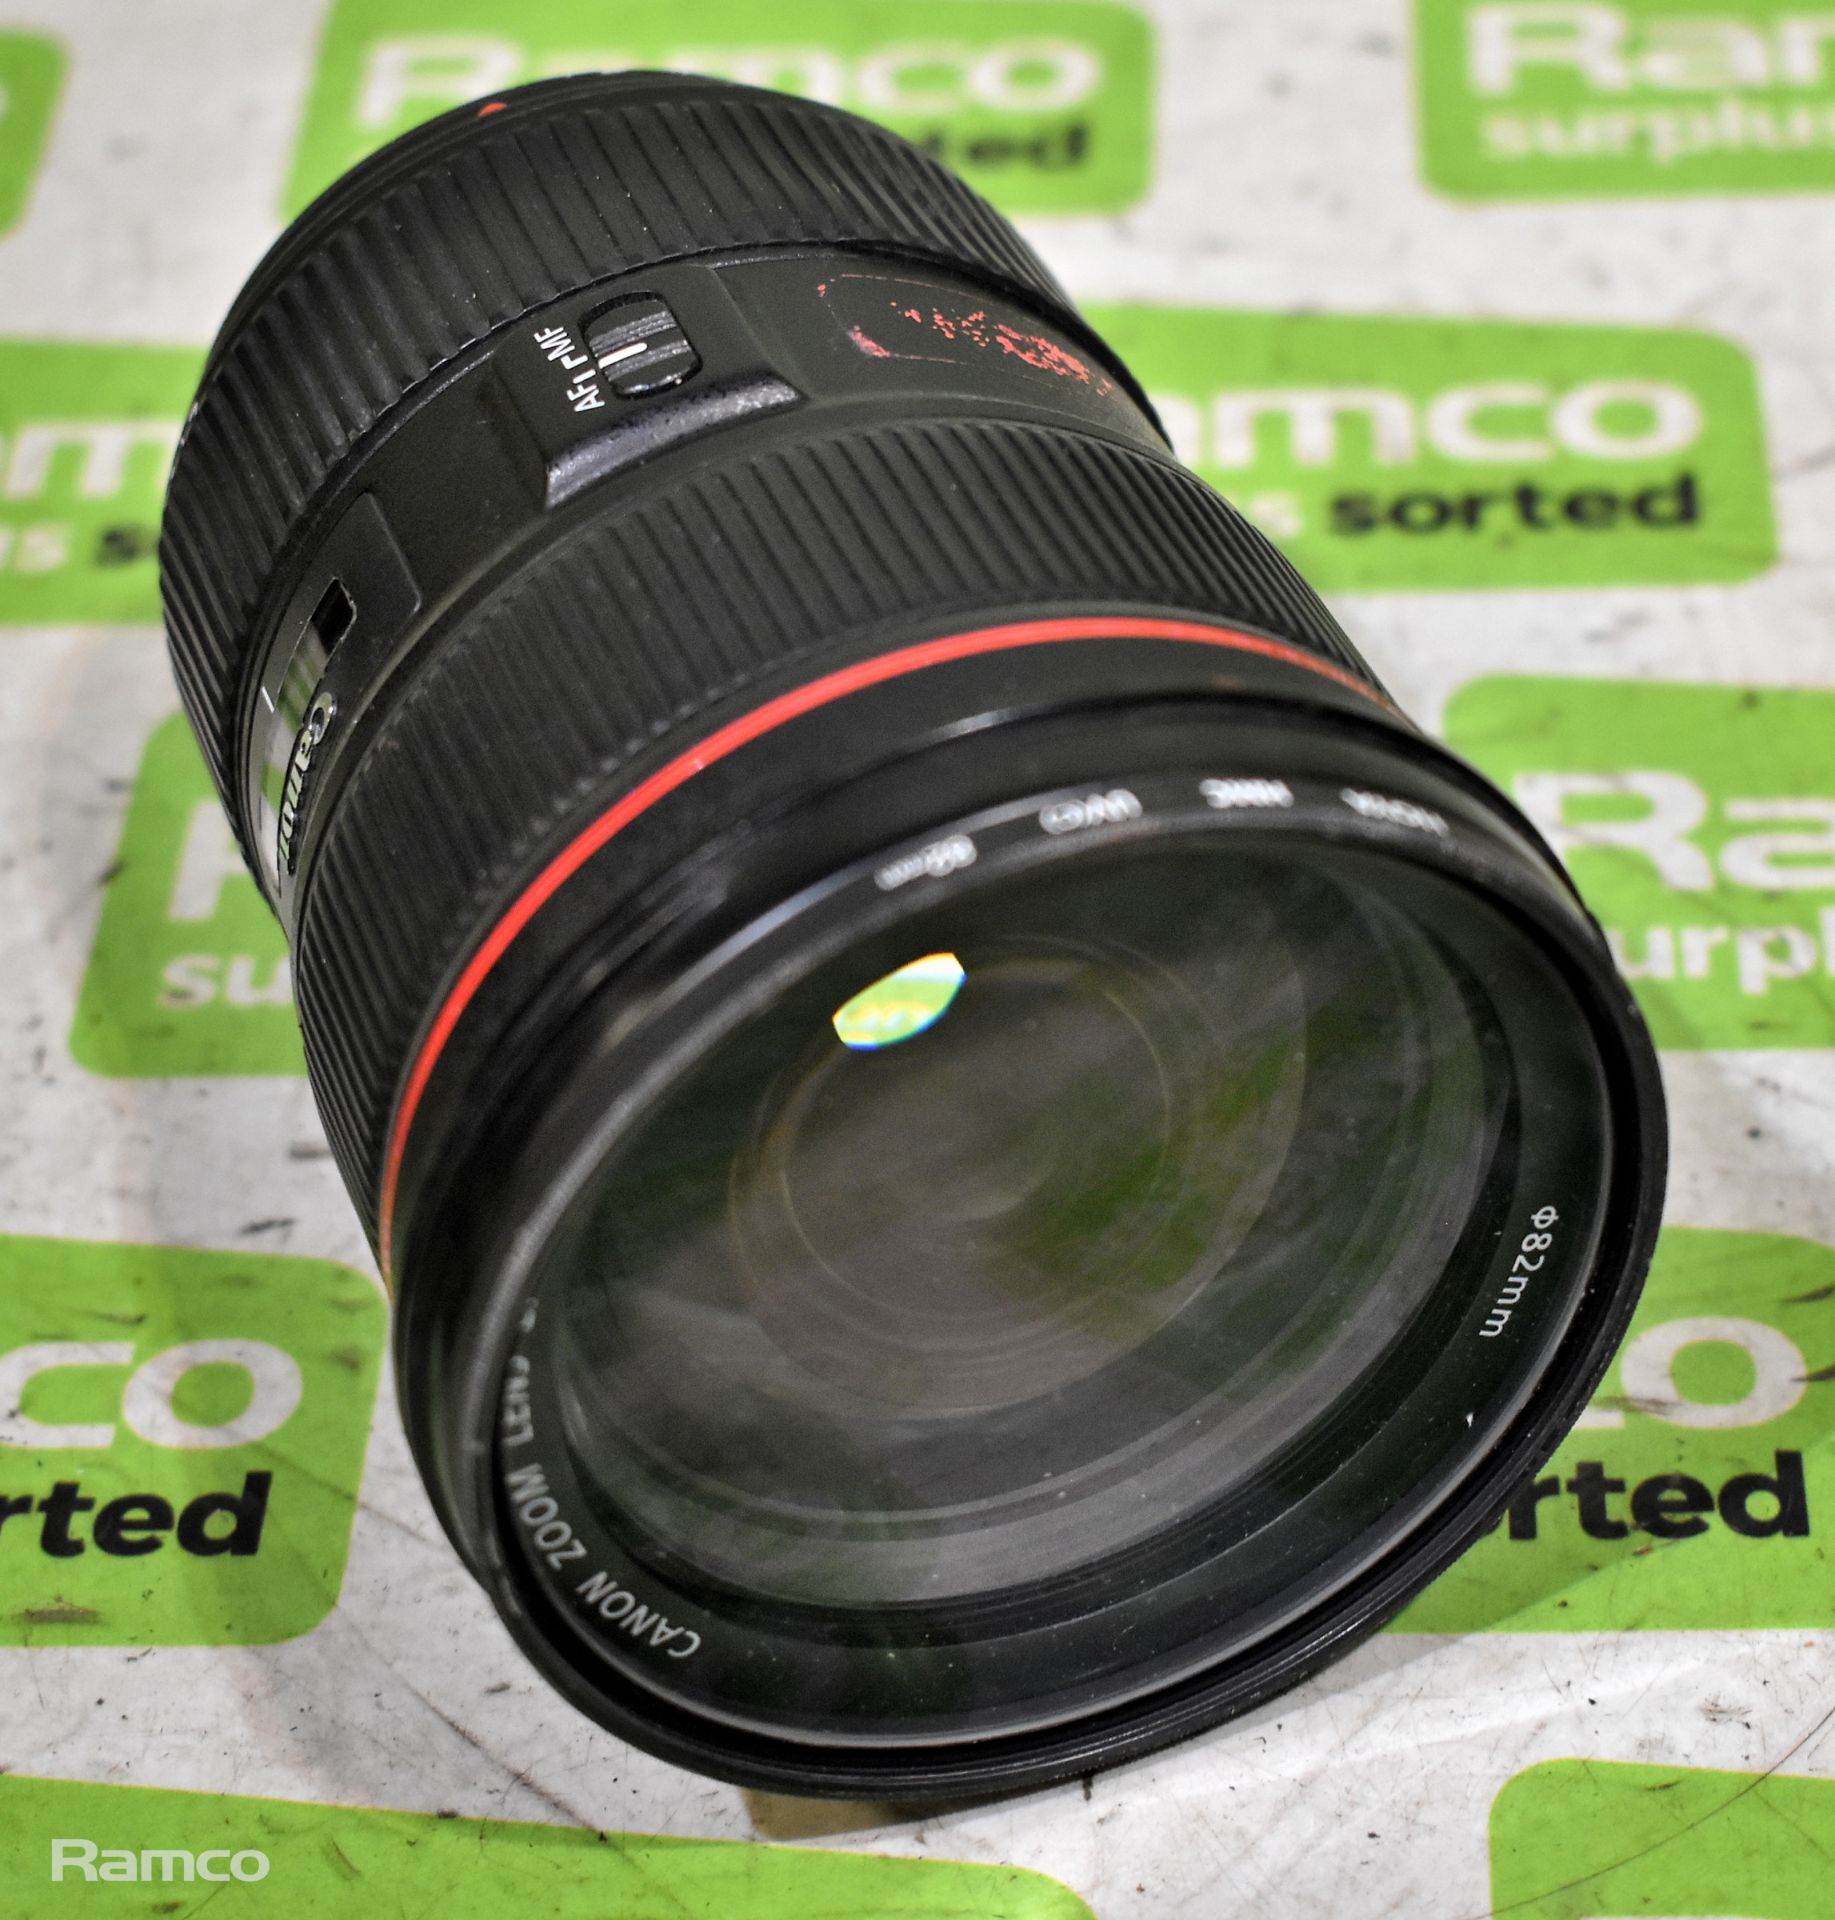 Canon Zoom lens EF 24-70mm F/2.8 L ii USM lens with Canon EW-88C hood - Image 5 of 7